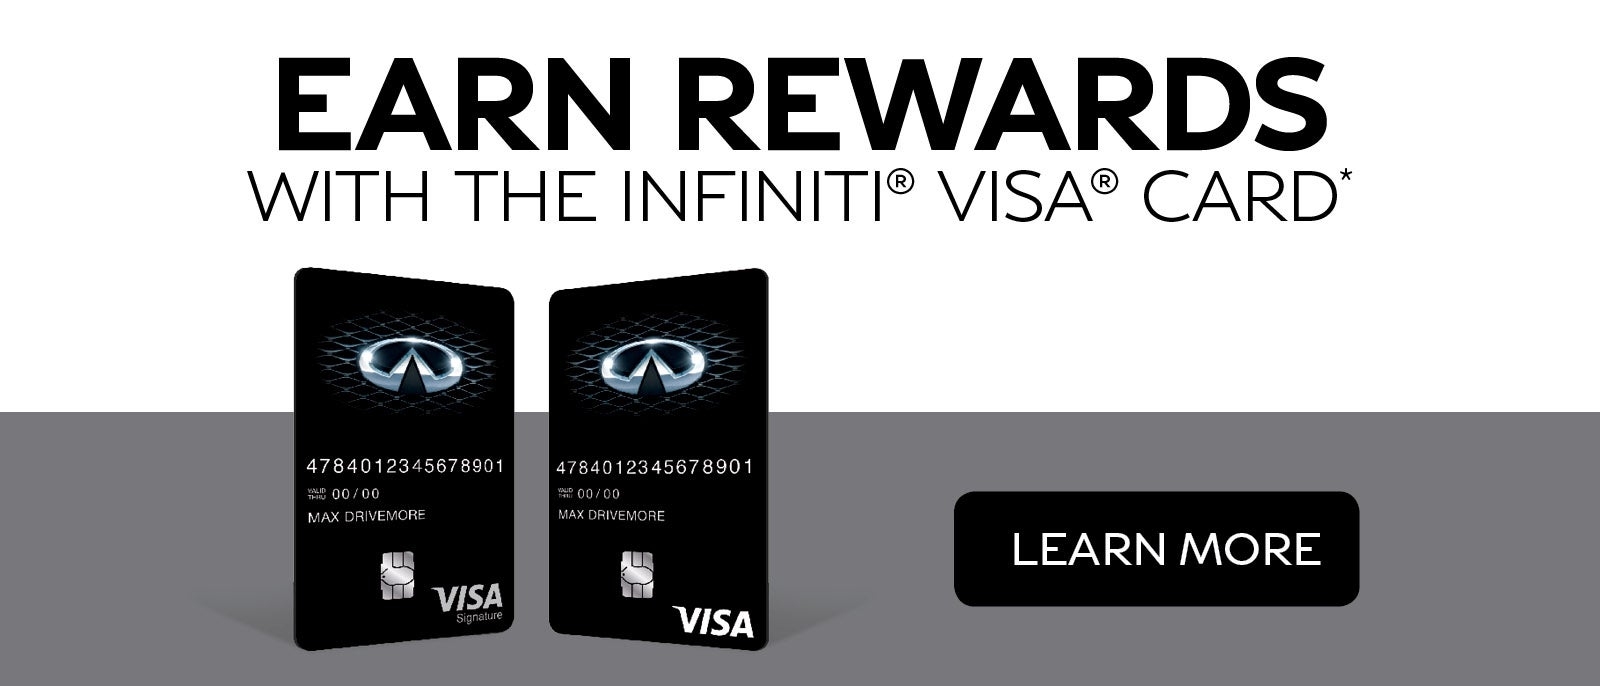 earn rewards with the INFINITI visa card*. learn more.